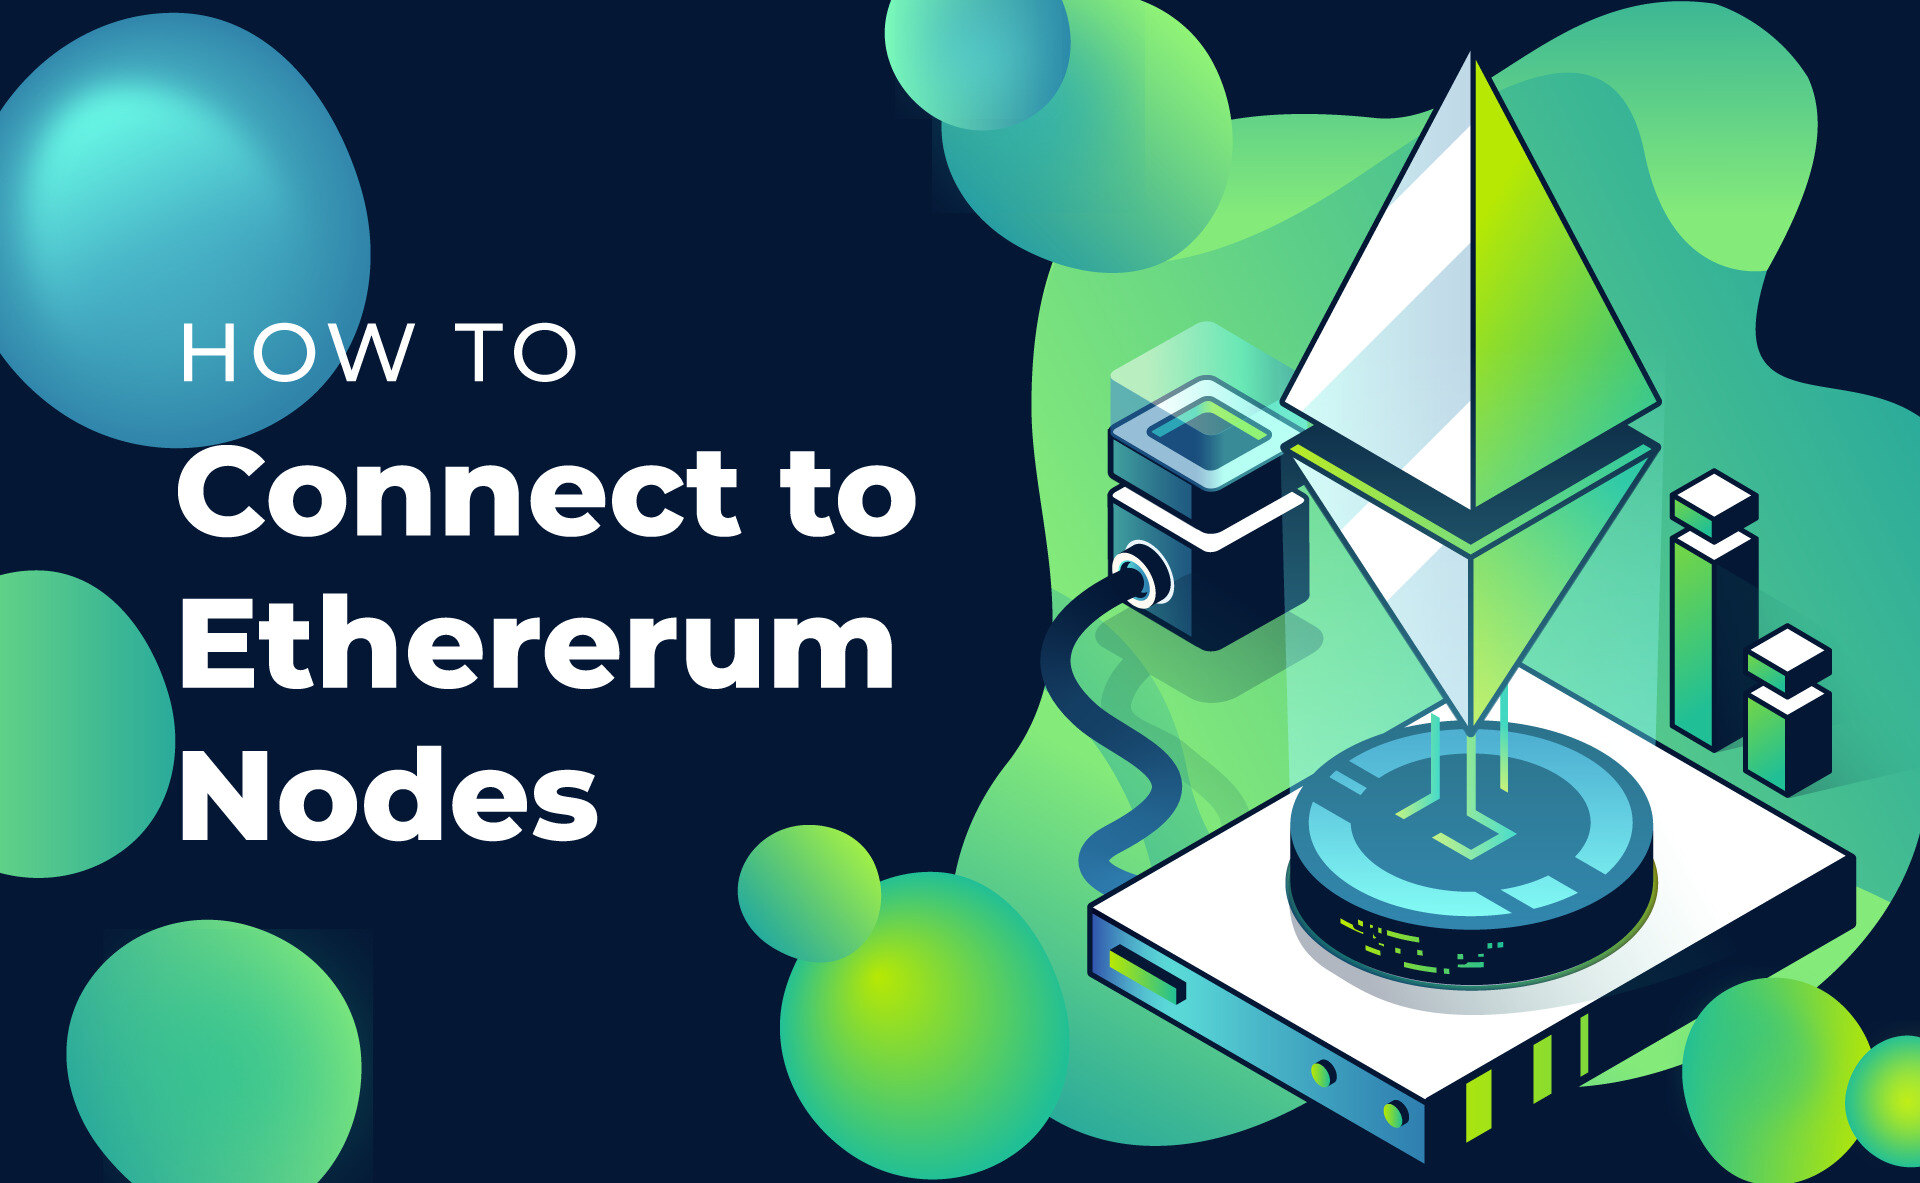 What Are Ethereum Nodes